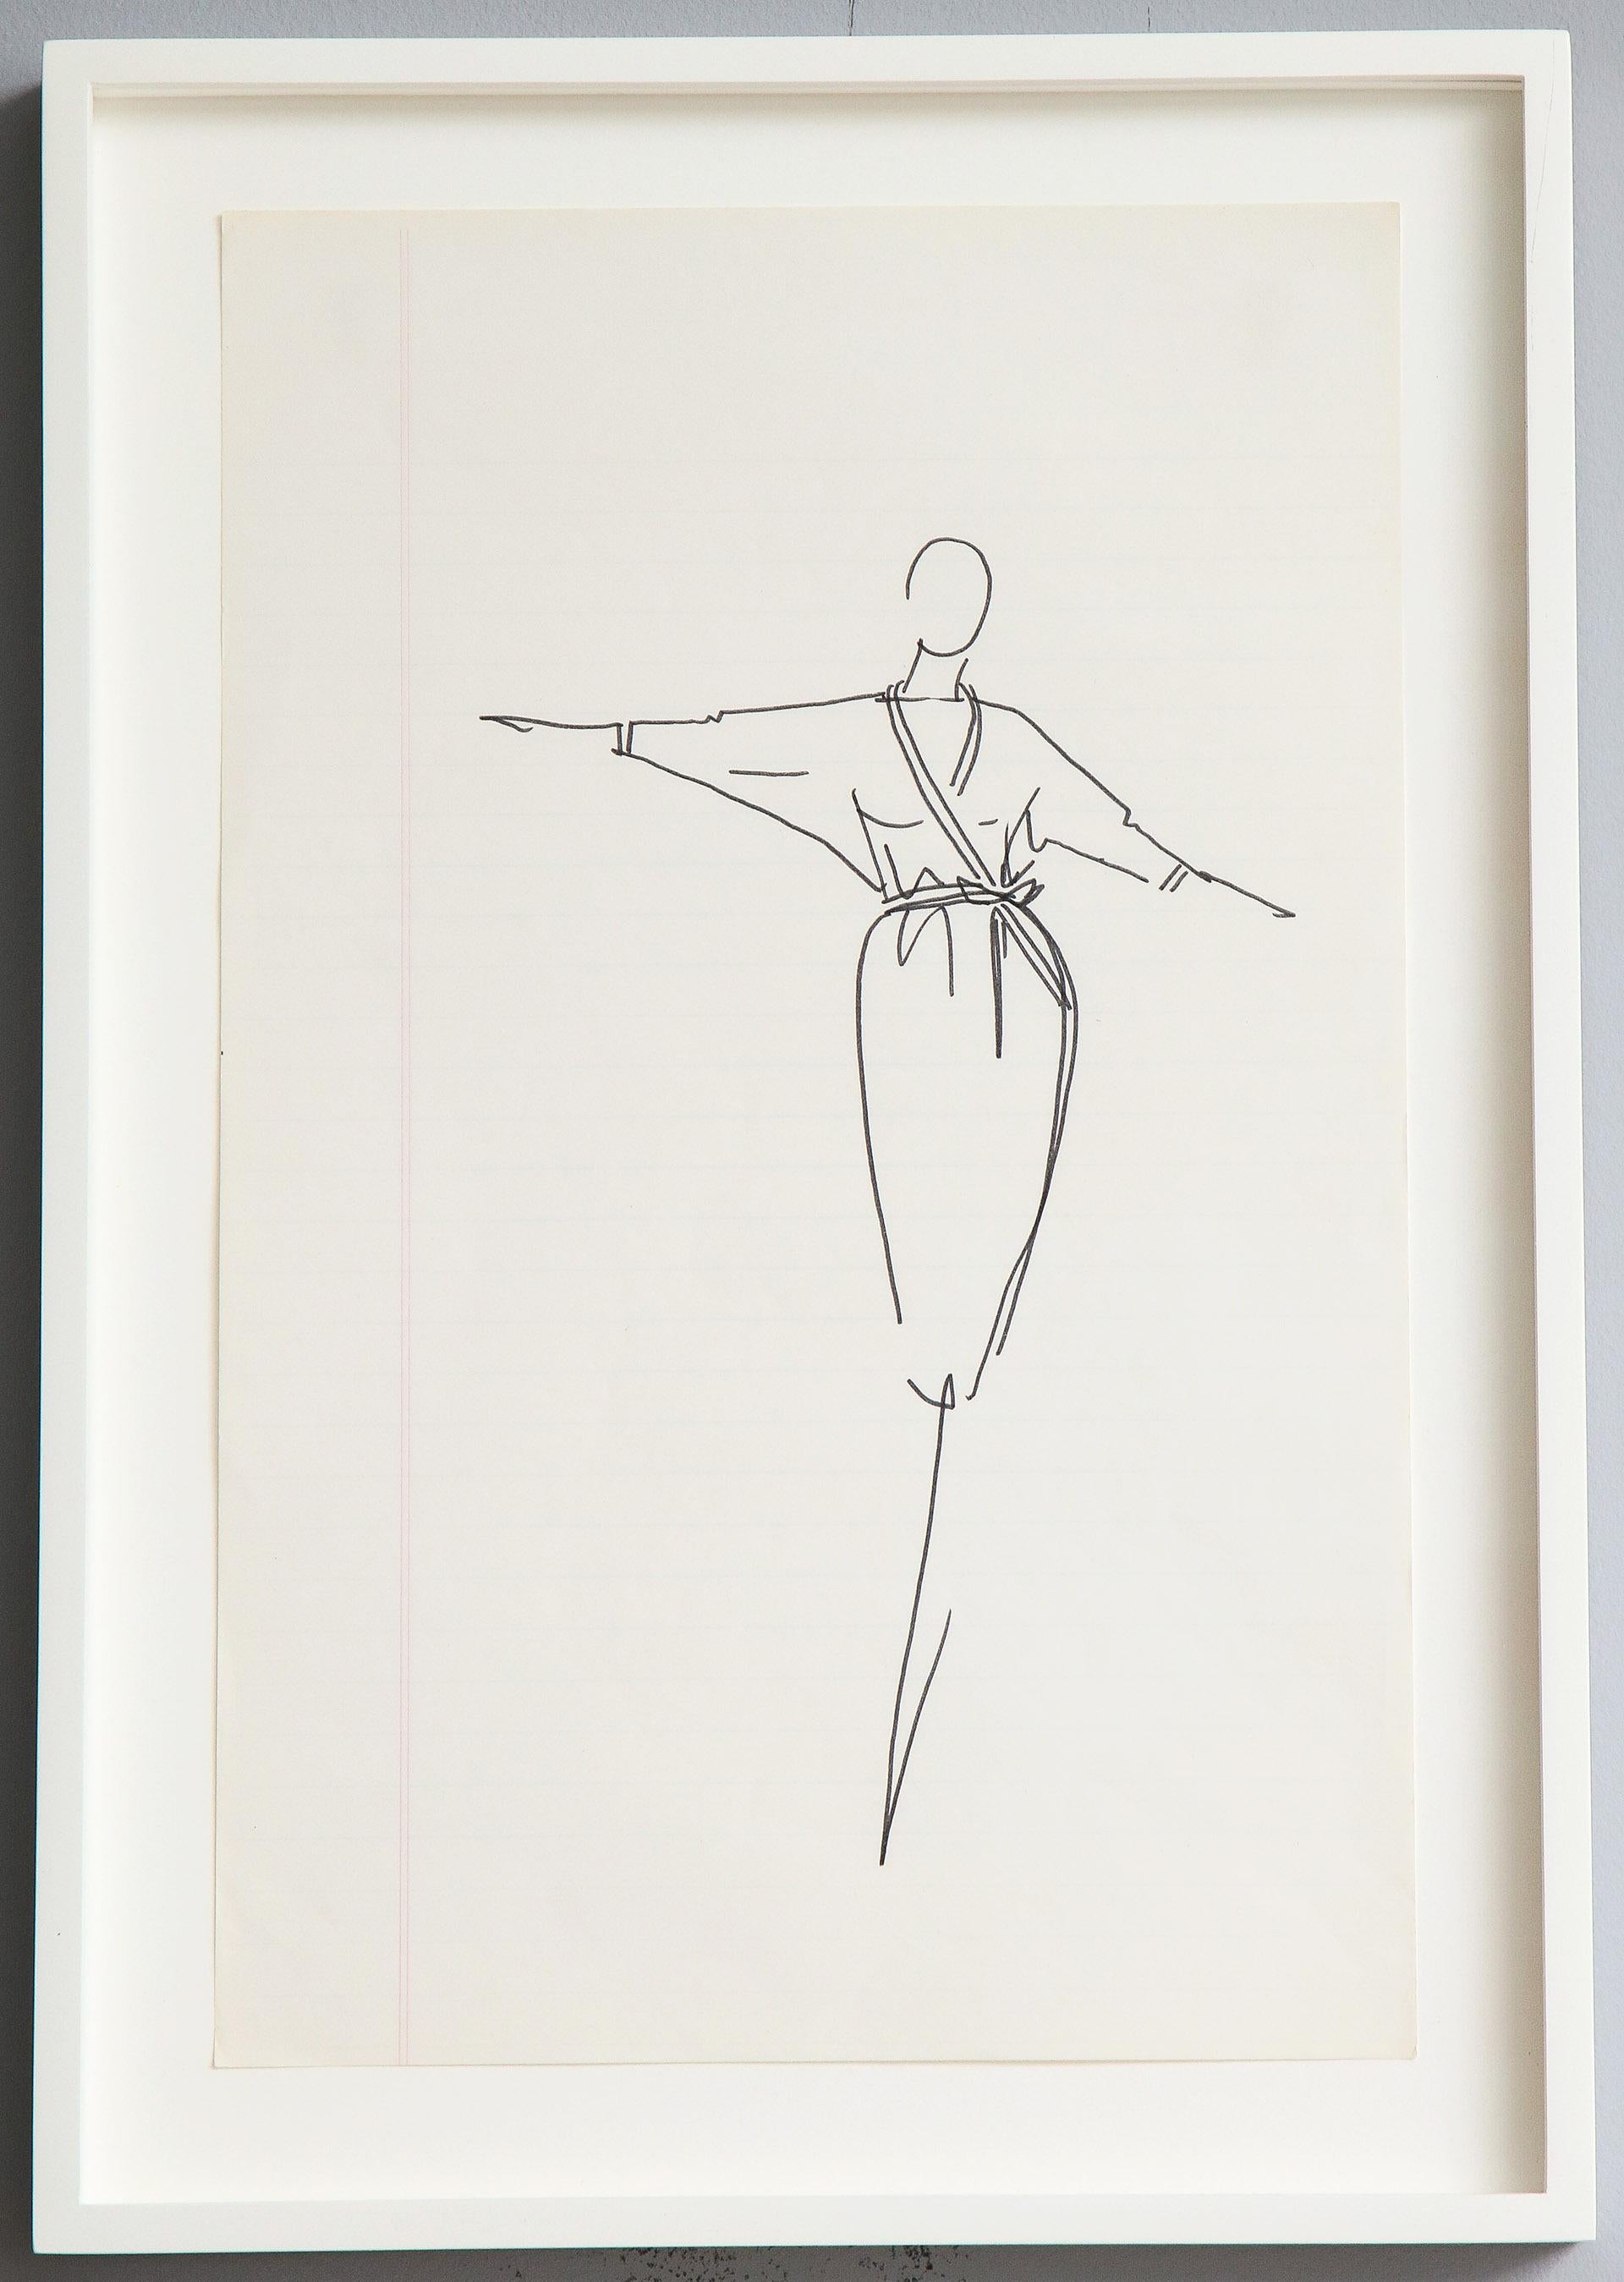 10 Ink Sketches by Iconic Fashion Designer Halston (PRICED EACH) 6